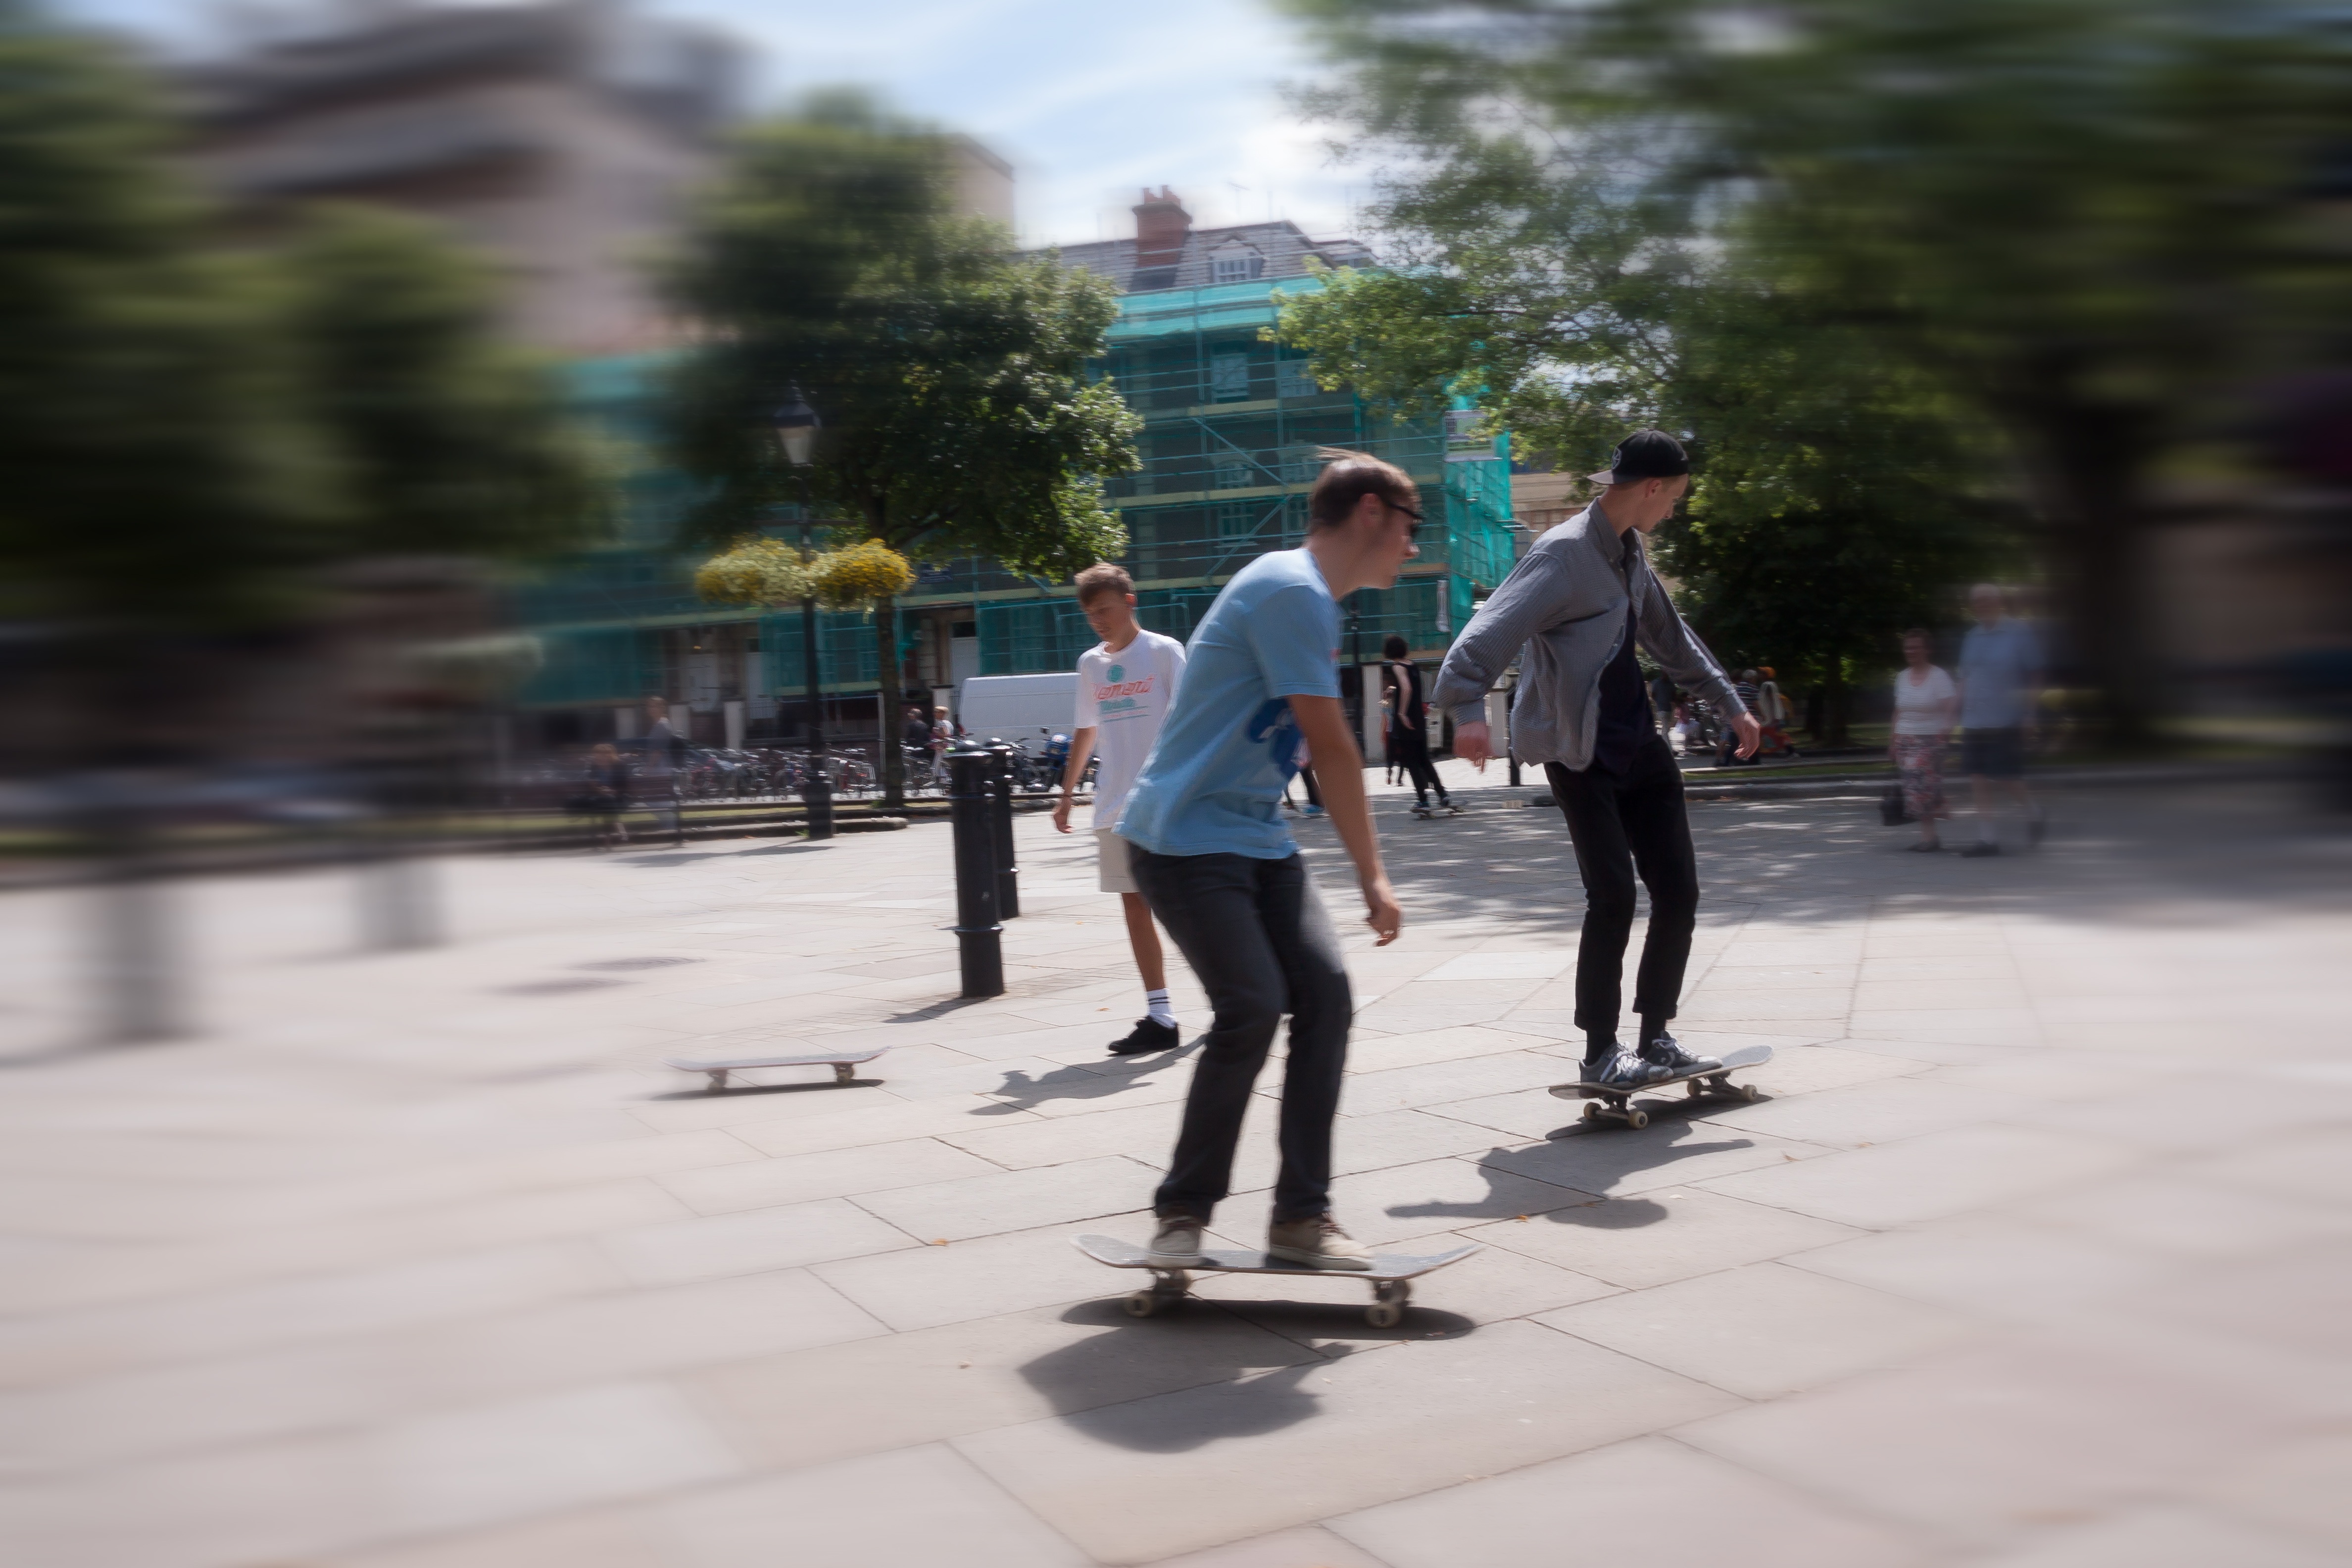 Skating in the city photo